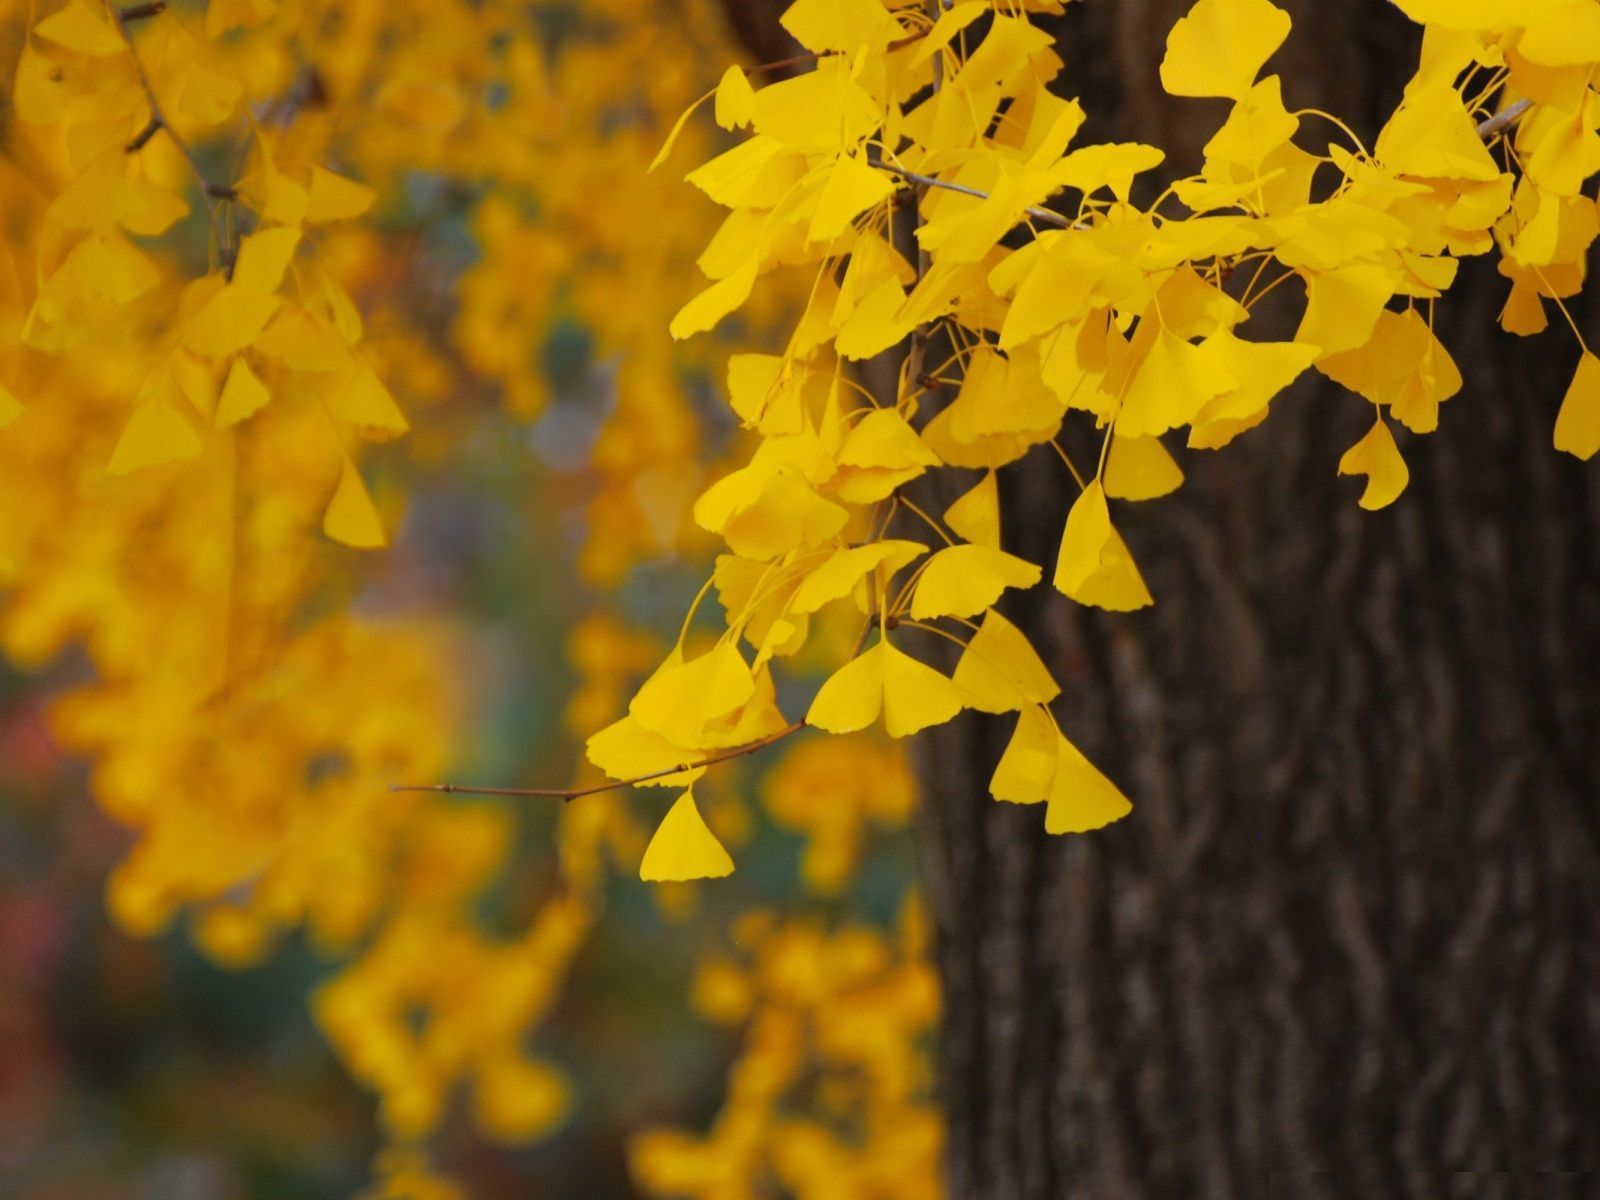 Ginkgo HD Wallpaper, Ginkgo Images | Cool Wallpapers